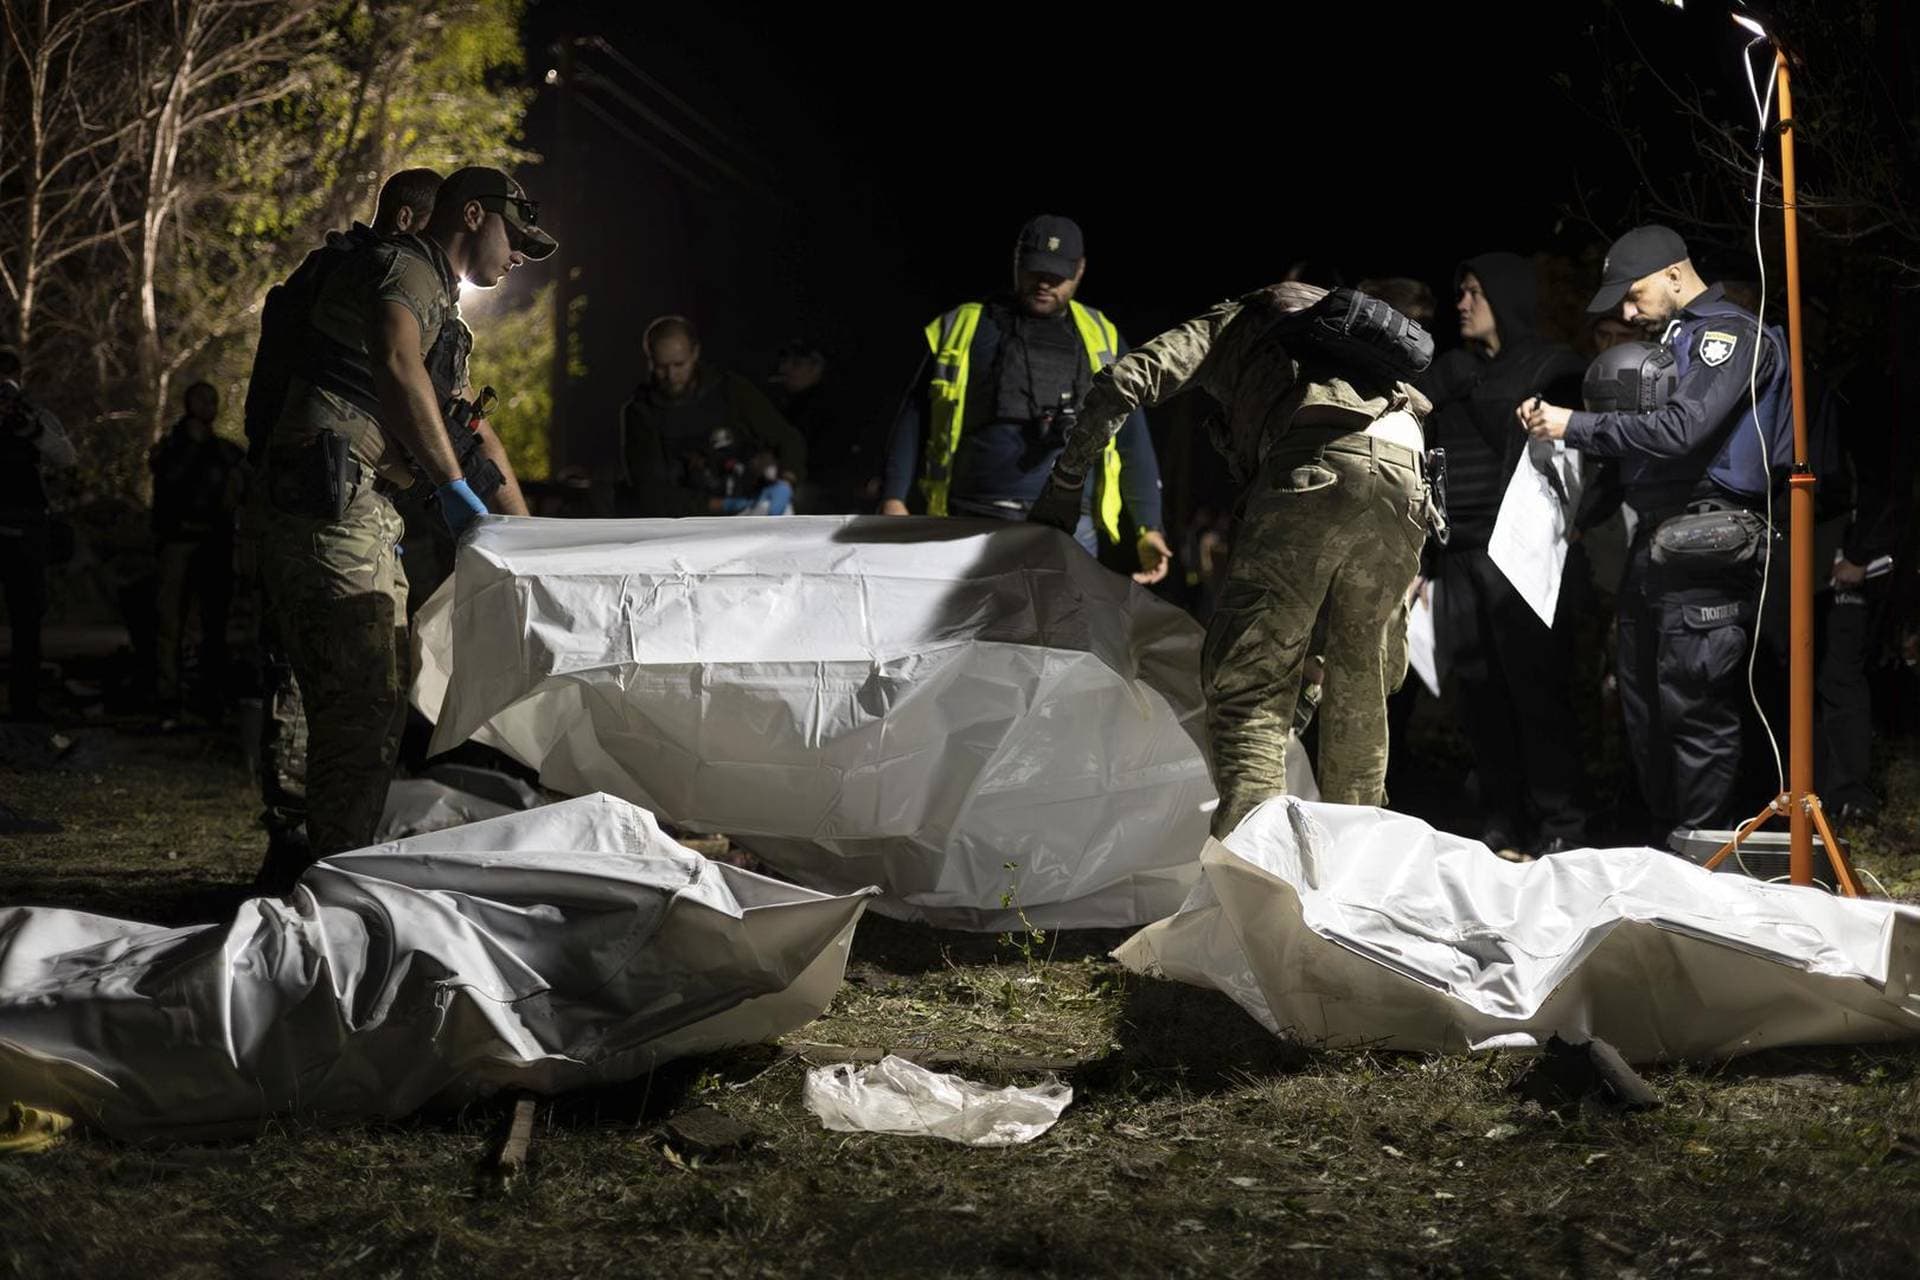 Ukrainian policemen inspect the bodies of persons that were killed by a Russian rocket attack that killed 51 people in the village of Hroza near Kharkiv